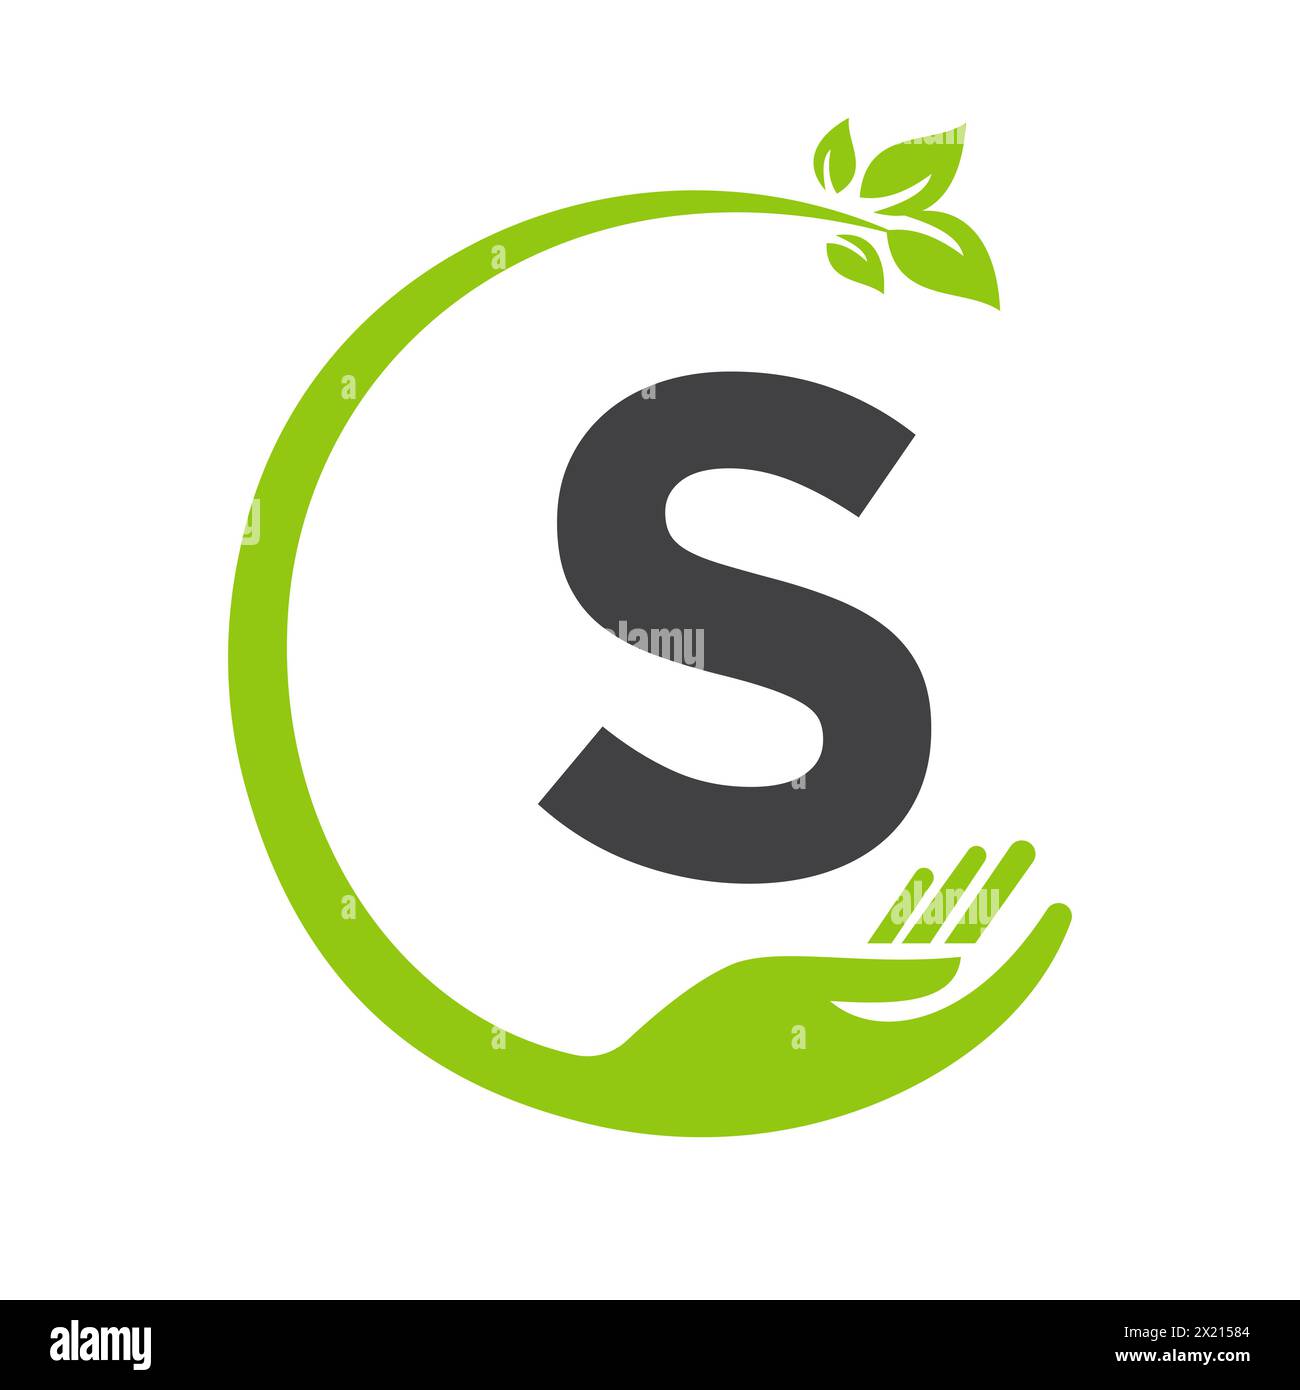 Eco Logo On Letter S Concept with Hand and Leaf Symbol. Recycle Sign Stock Vector